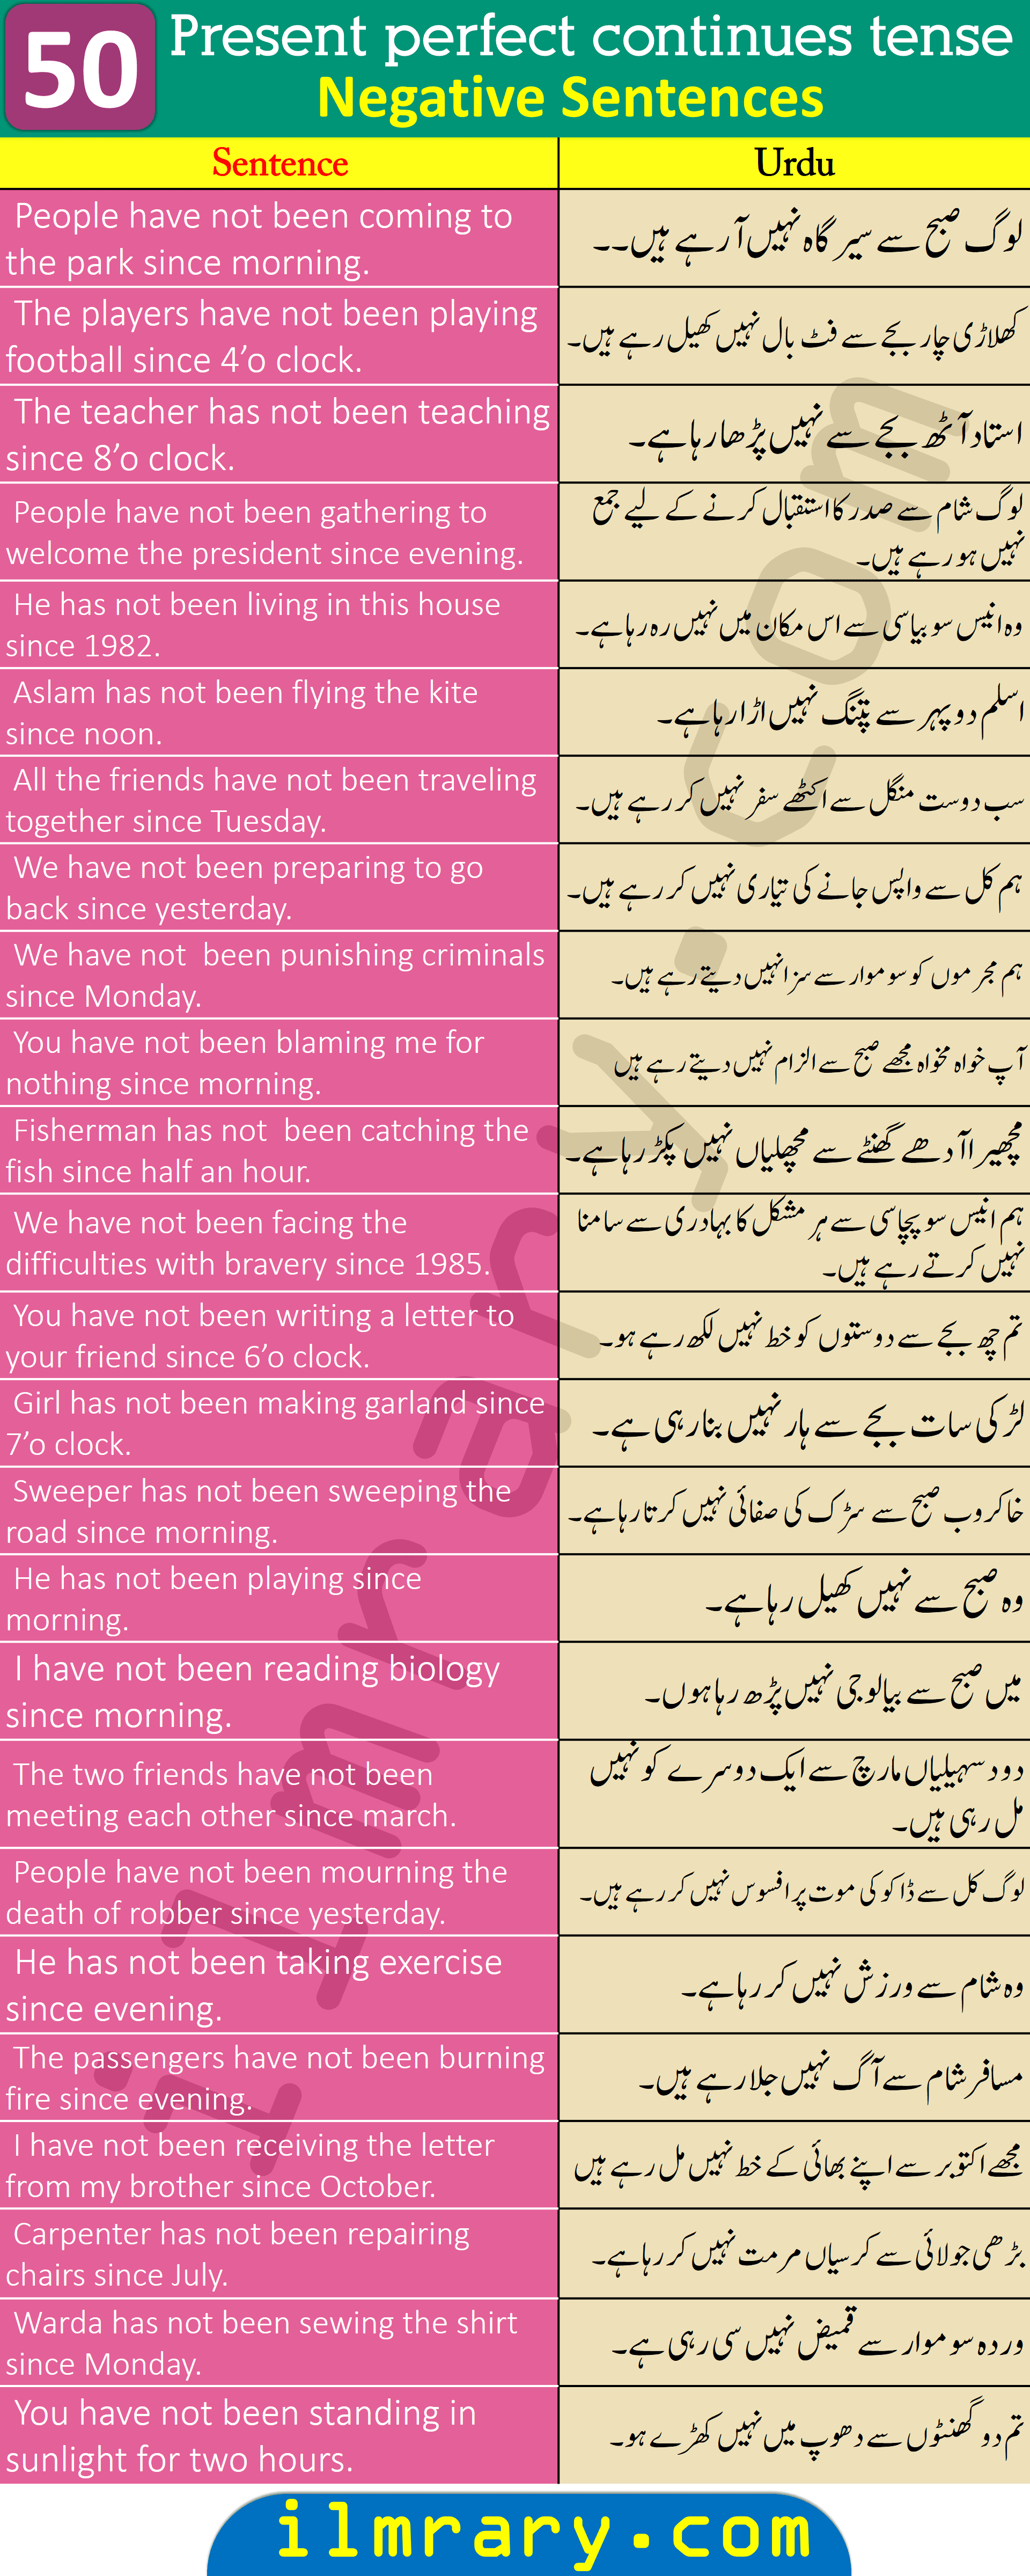 150 Example Sentences for Present Perfect Continuous Tense with Urdu Translation